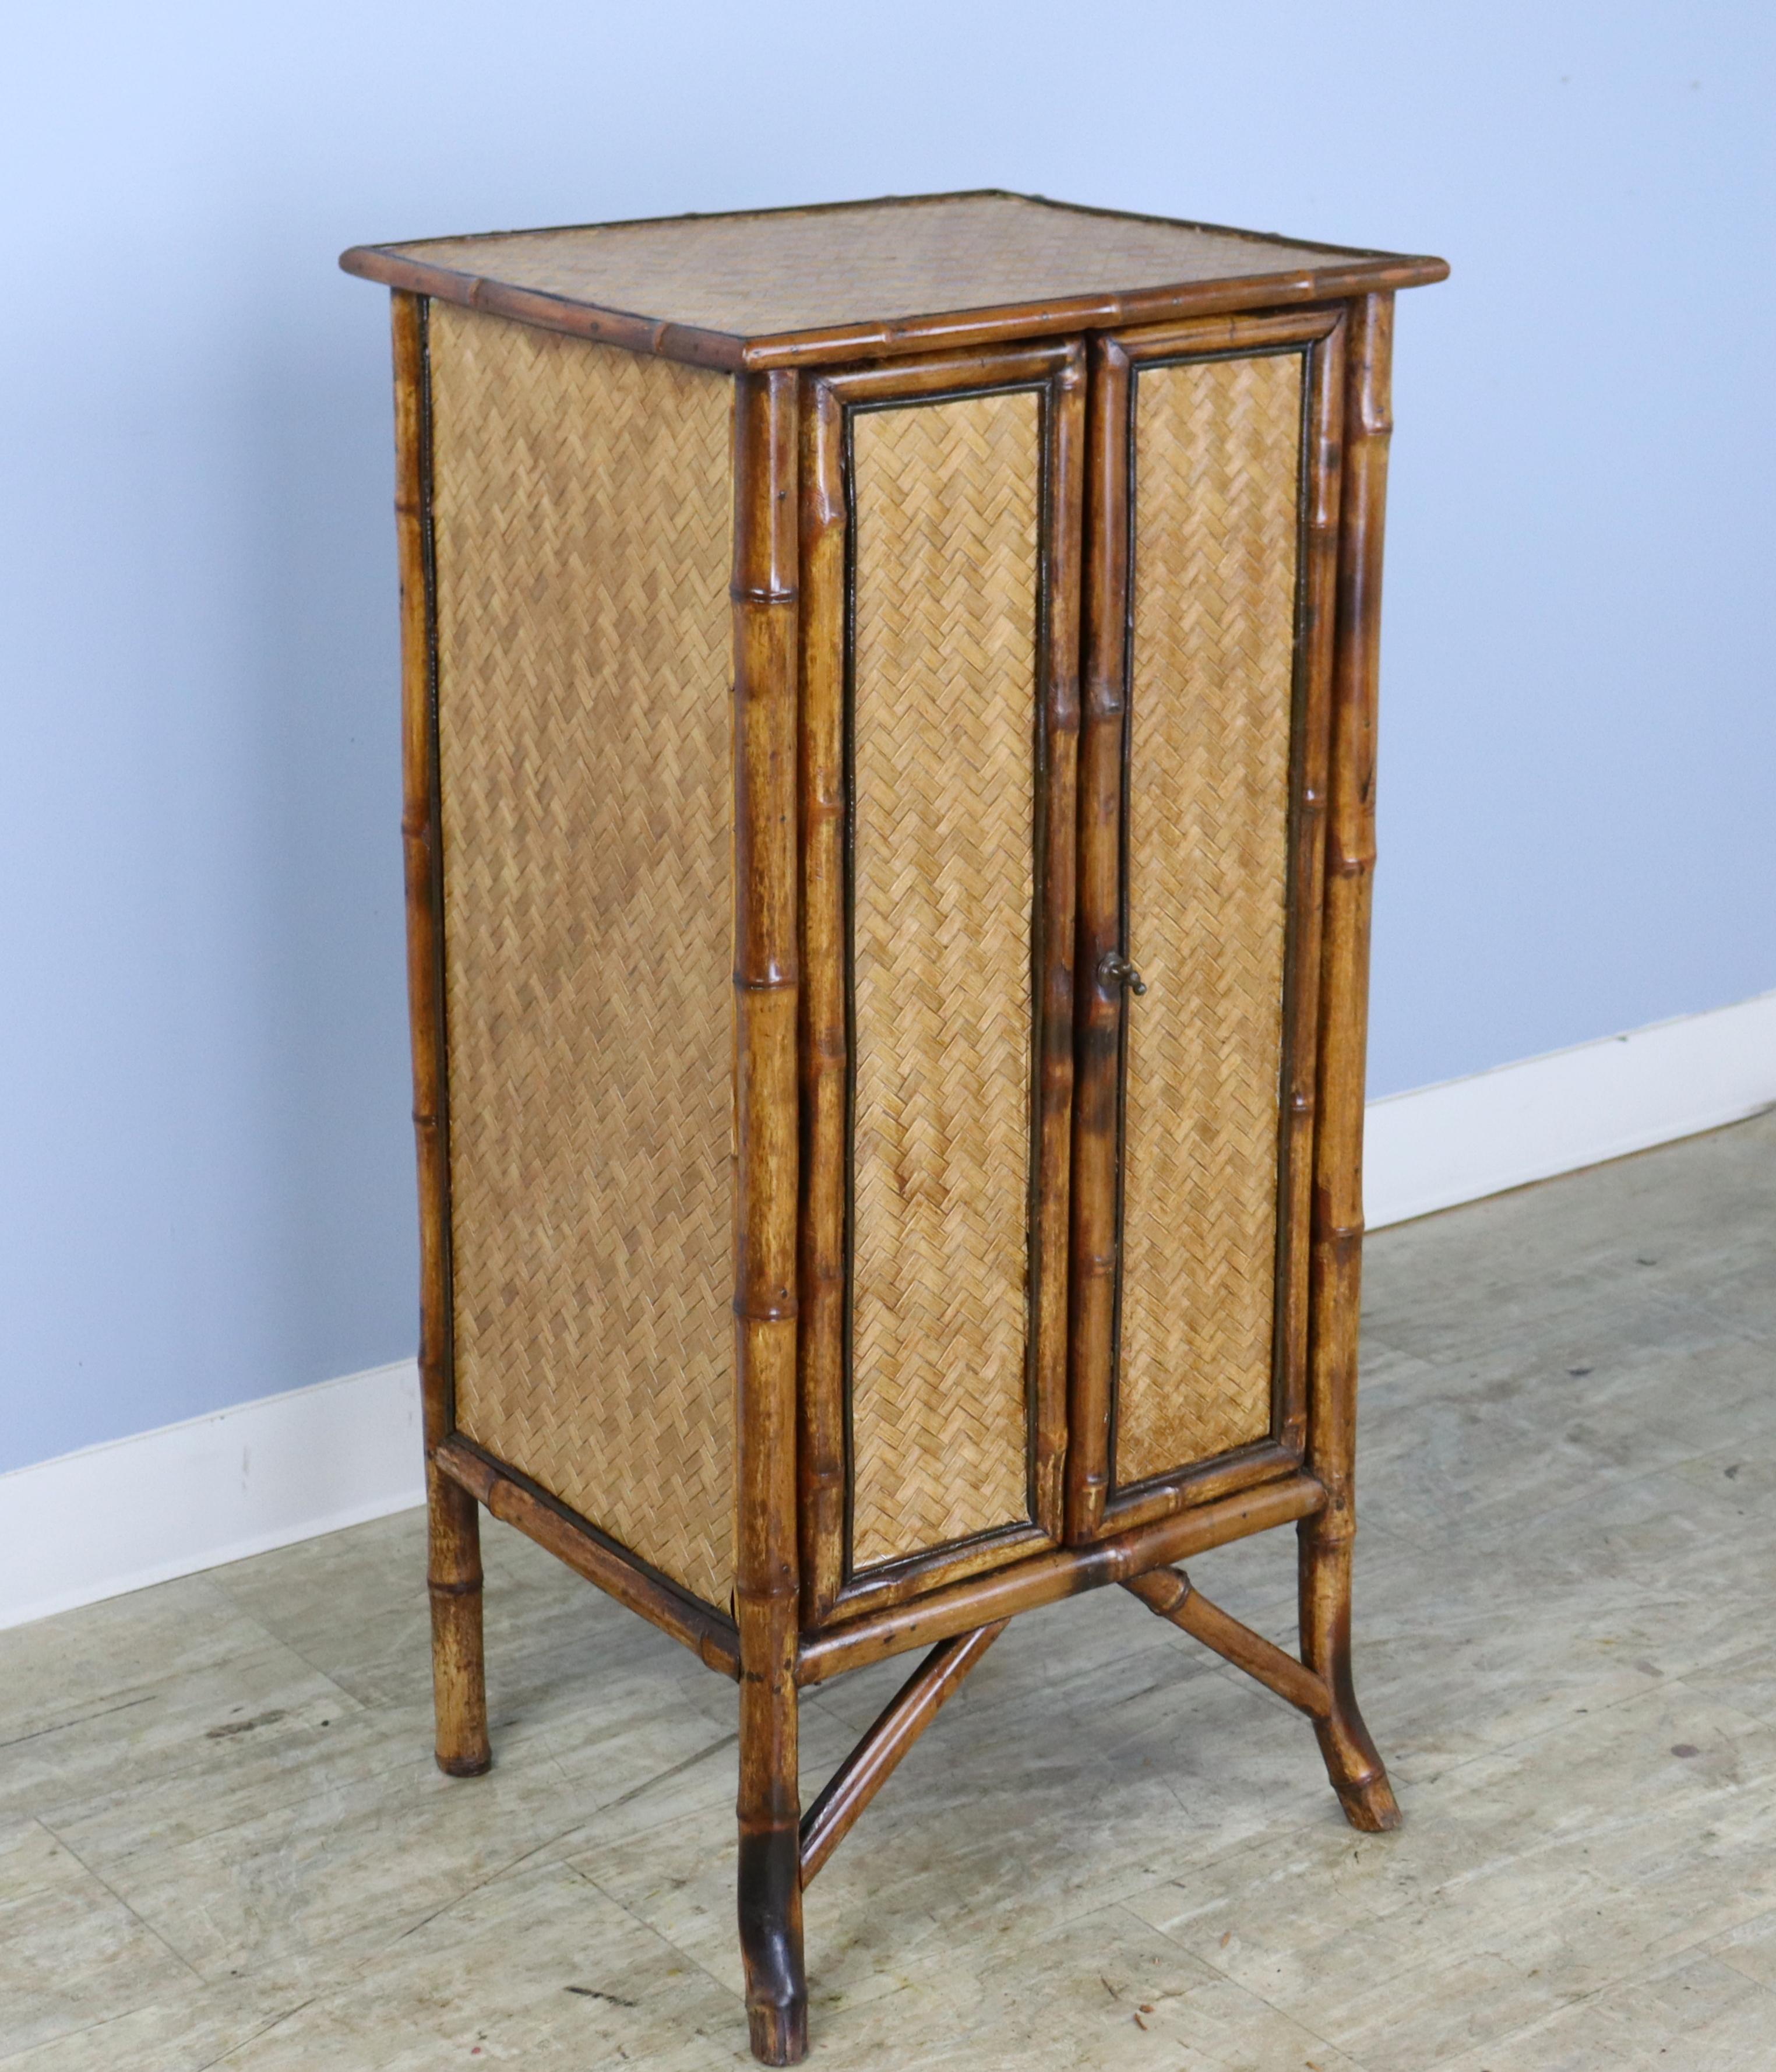 A charming bamboo cabinet with rattan top in very good antique condition. Three interior shelves. The bamboos is vibrant and has great color. Swing closure on right door works well.